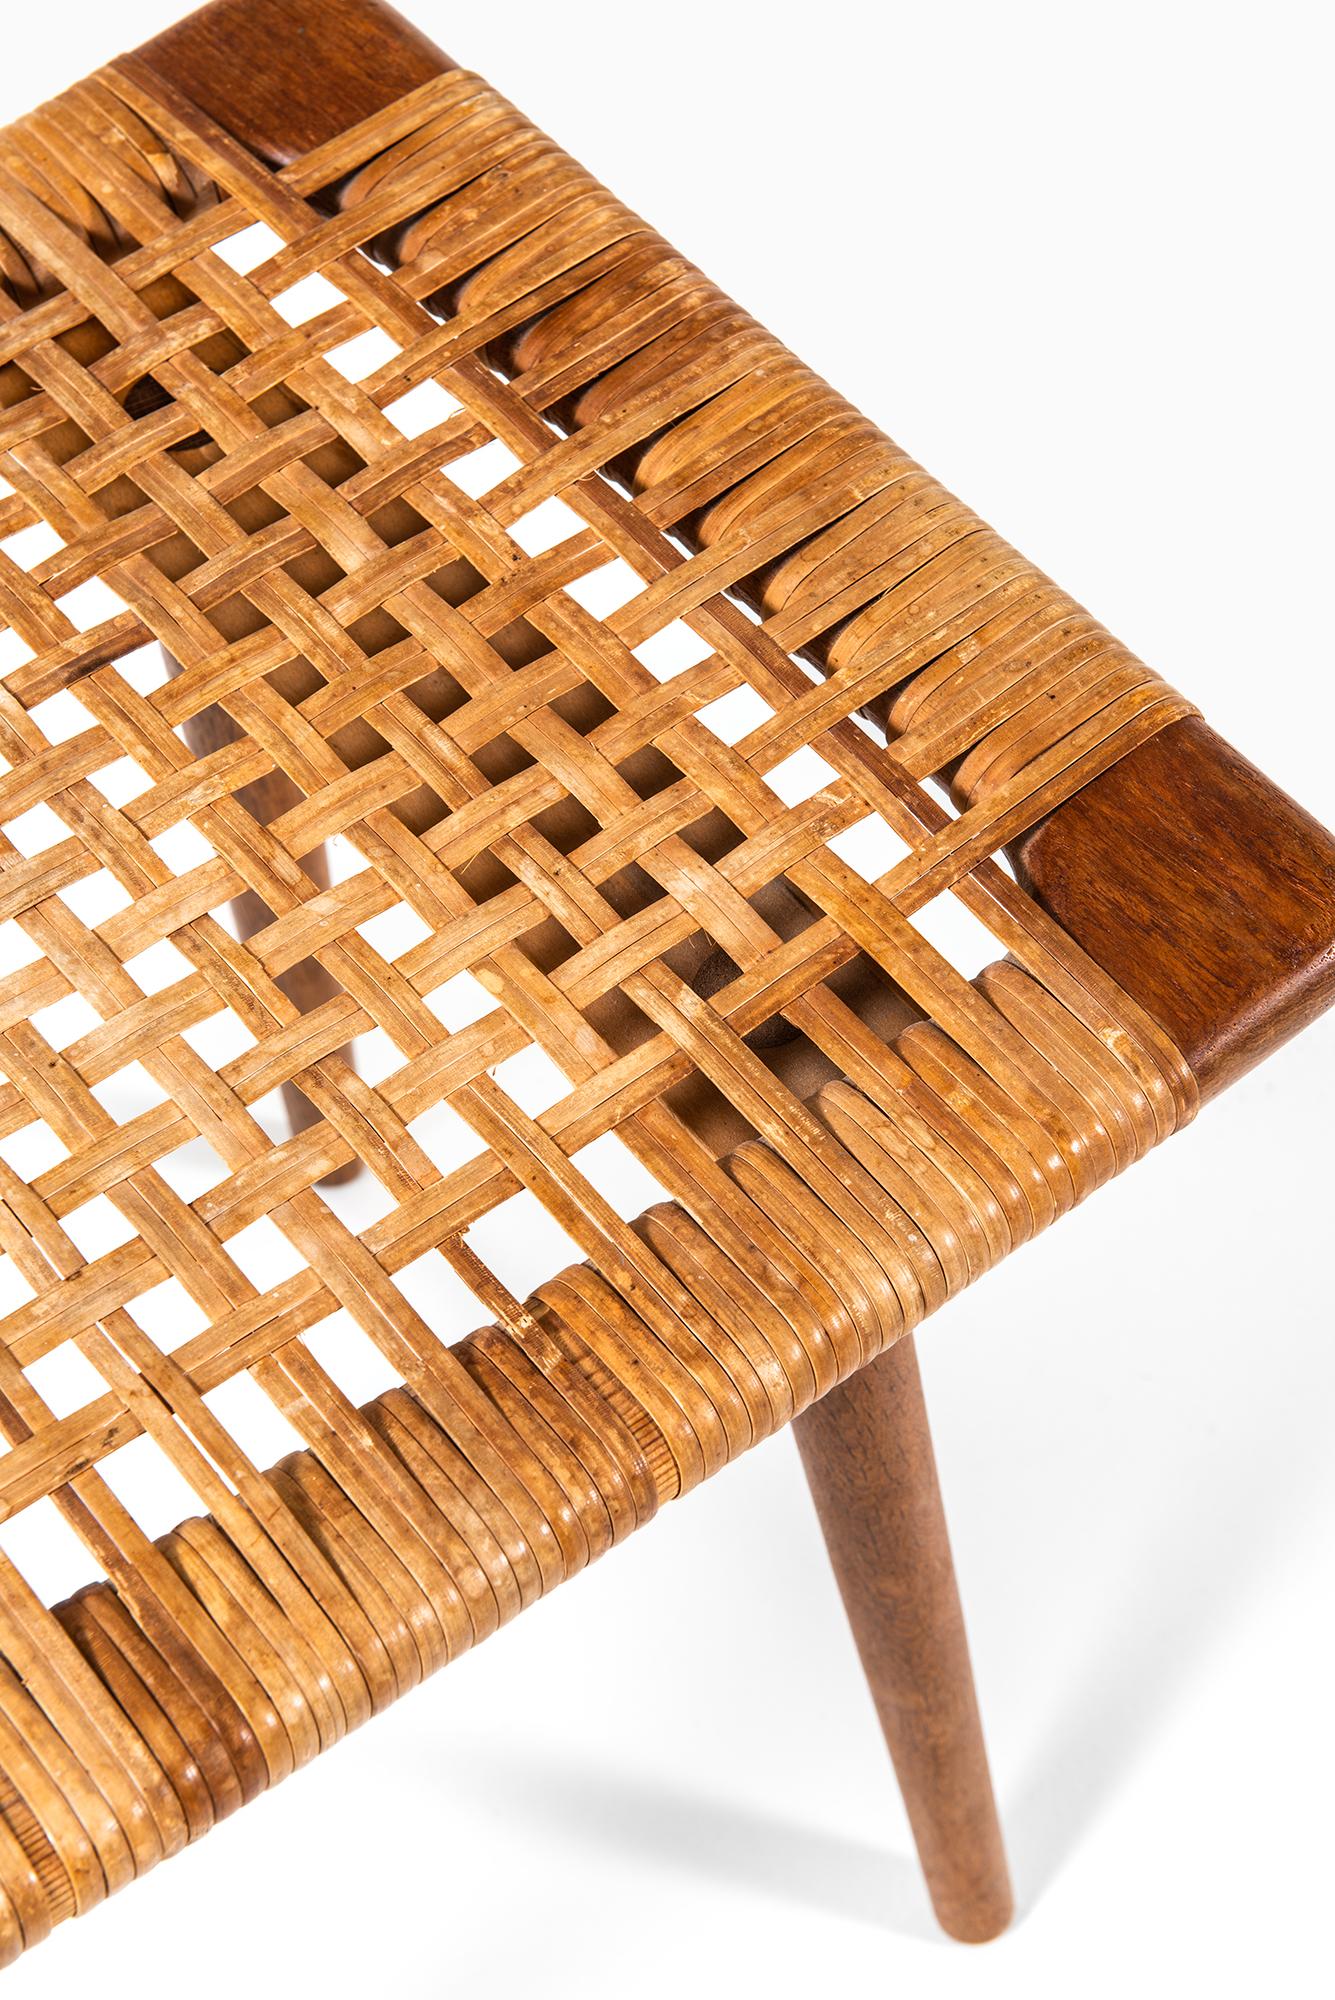 Danish Pair of Stools in Oak and Woven Cane Produced in Denmark